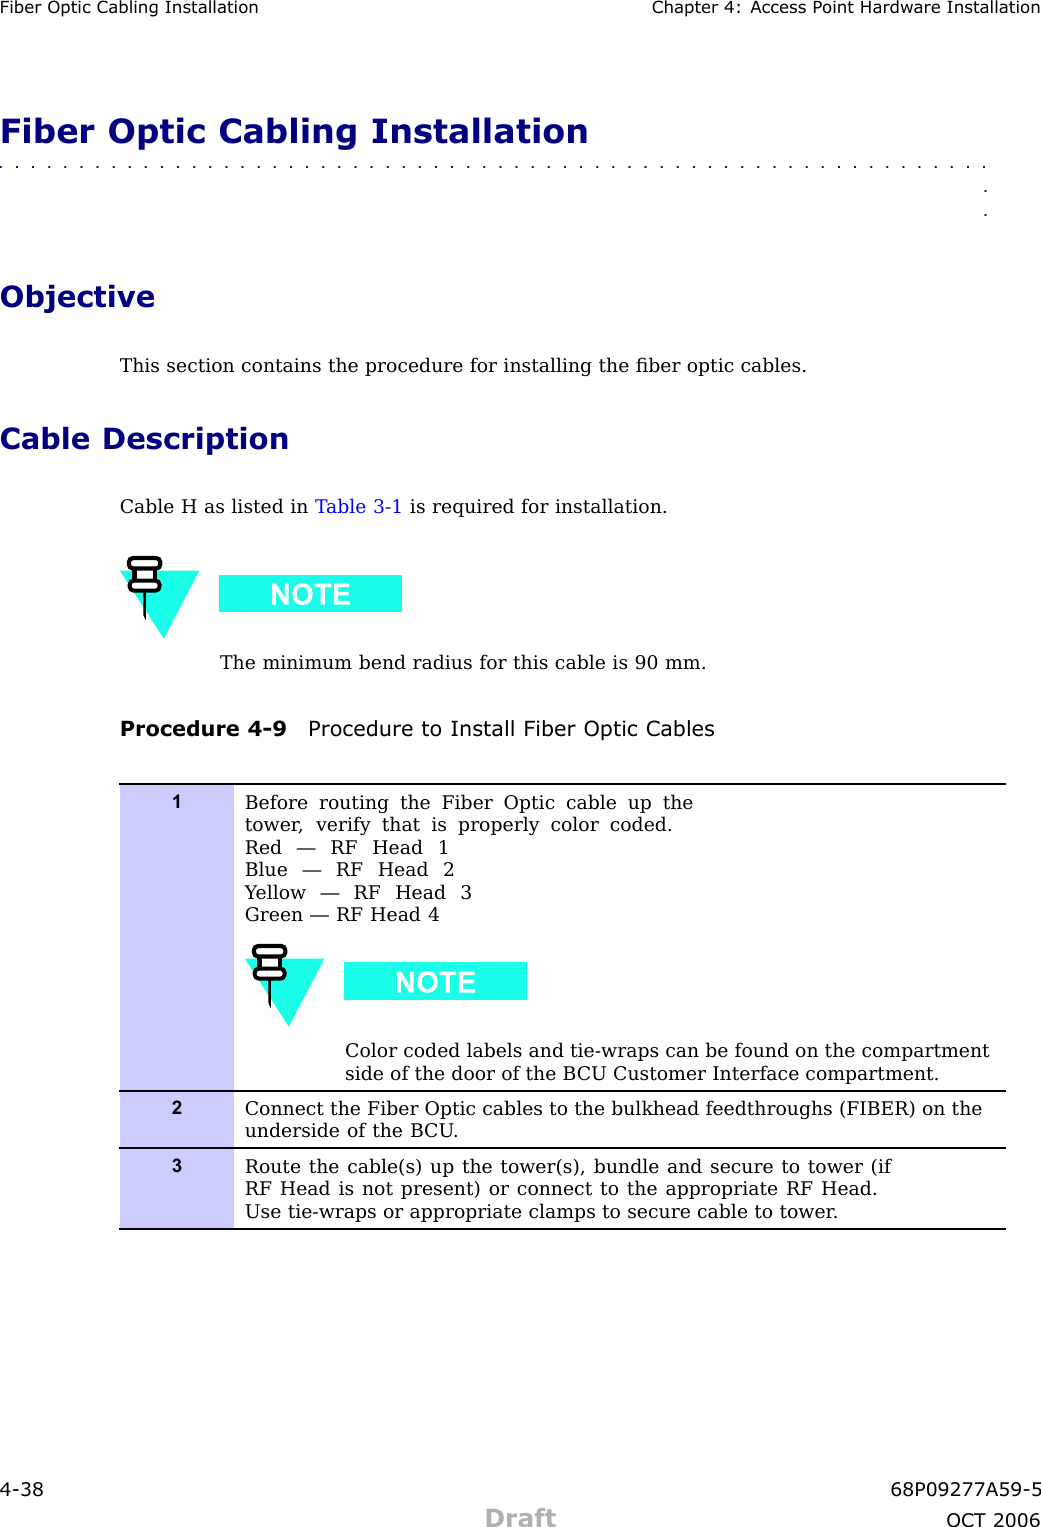 Fiber Optic Cabling Installation Chapter 4: Access P oint Hardw are InstallationFiber Optic Cabling Installation■■■■■■■■■■■■■■■■■■■■■■■■■■■■■■■■■■■■■■■■■■■■■■■■■■■■■■■■■■■■■■■■ObjectiveThis section contains the procedure for installing the ﬁber optic cables.Cable DescriptionCable H as listed in T able 3 -1 is required for installation.The minimum bend radius for this cable is 90 mm.Procedure 4 -9 Procedure to Install Fiber Optic Cables1Before routing the Fiber Optic cable up thetower , verify that is properly color coded.Red — RF Head 1Blue — RF Head 2Y ellow — RF Head 3Green — RF Head 4Color coded labels and tie-wraps can be found on the compartmentside of the door of the B CU Customer Interface compartment.2Connect the Fiber Optic cables to the bulkhead feedthroughs (FIBER) on theunderside of the B CU .3Route the cable(s) up the tower(s), bundle and secure to tower (ifRF Head is not present) or connect to the appropriate RF Head.Use tie-wraps or appropriate clamps to secure cable to tower .4 -38 68P09277A59 -5Draft OCT 2006